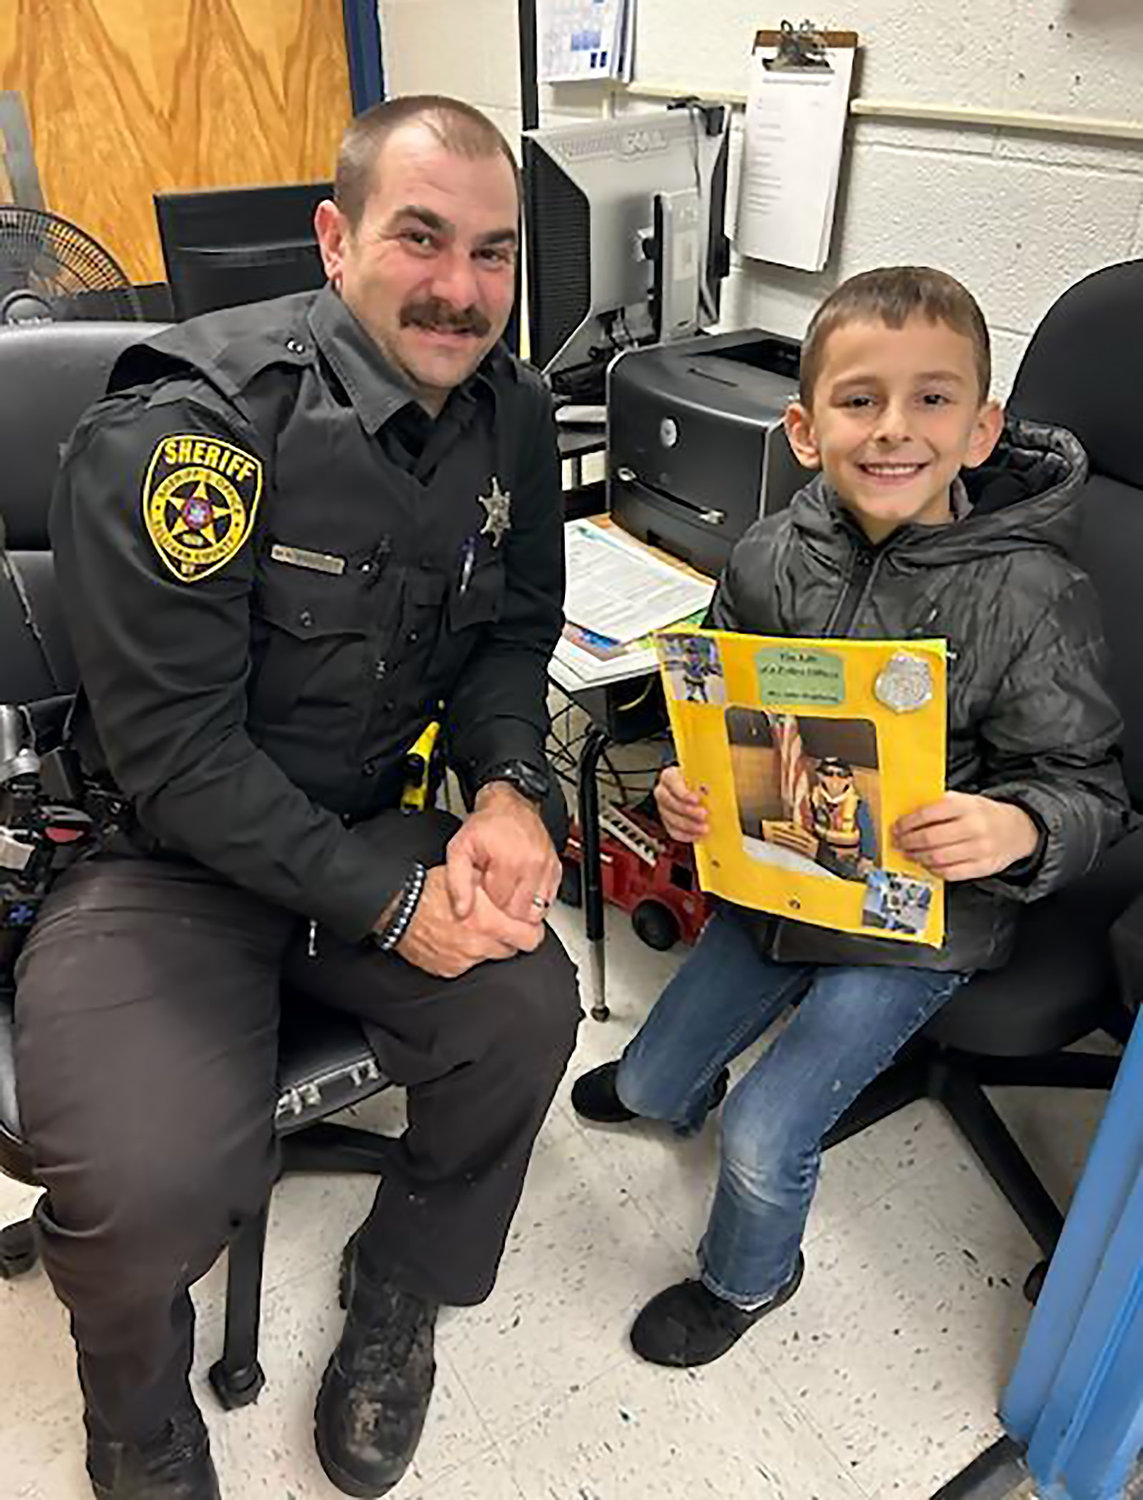 Albi shared his story with the school resource officer...